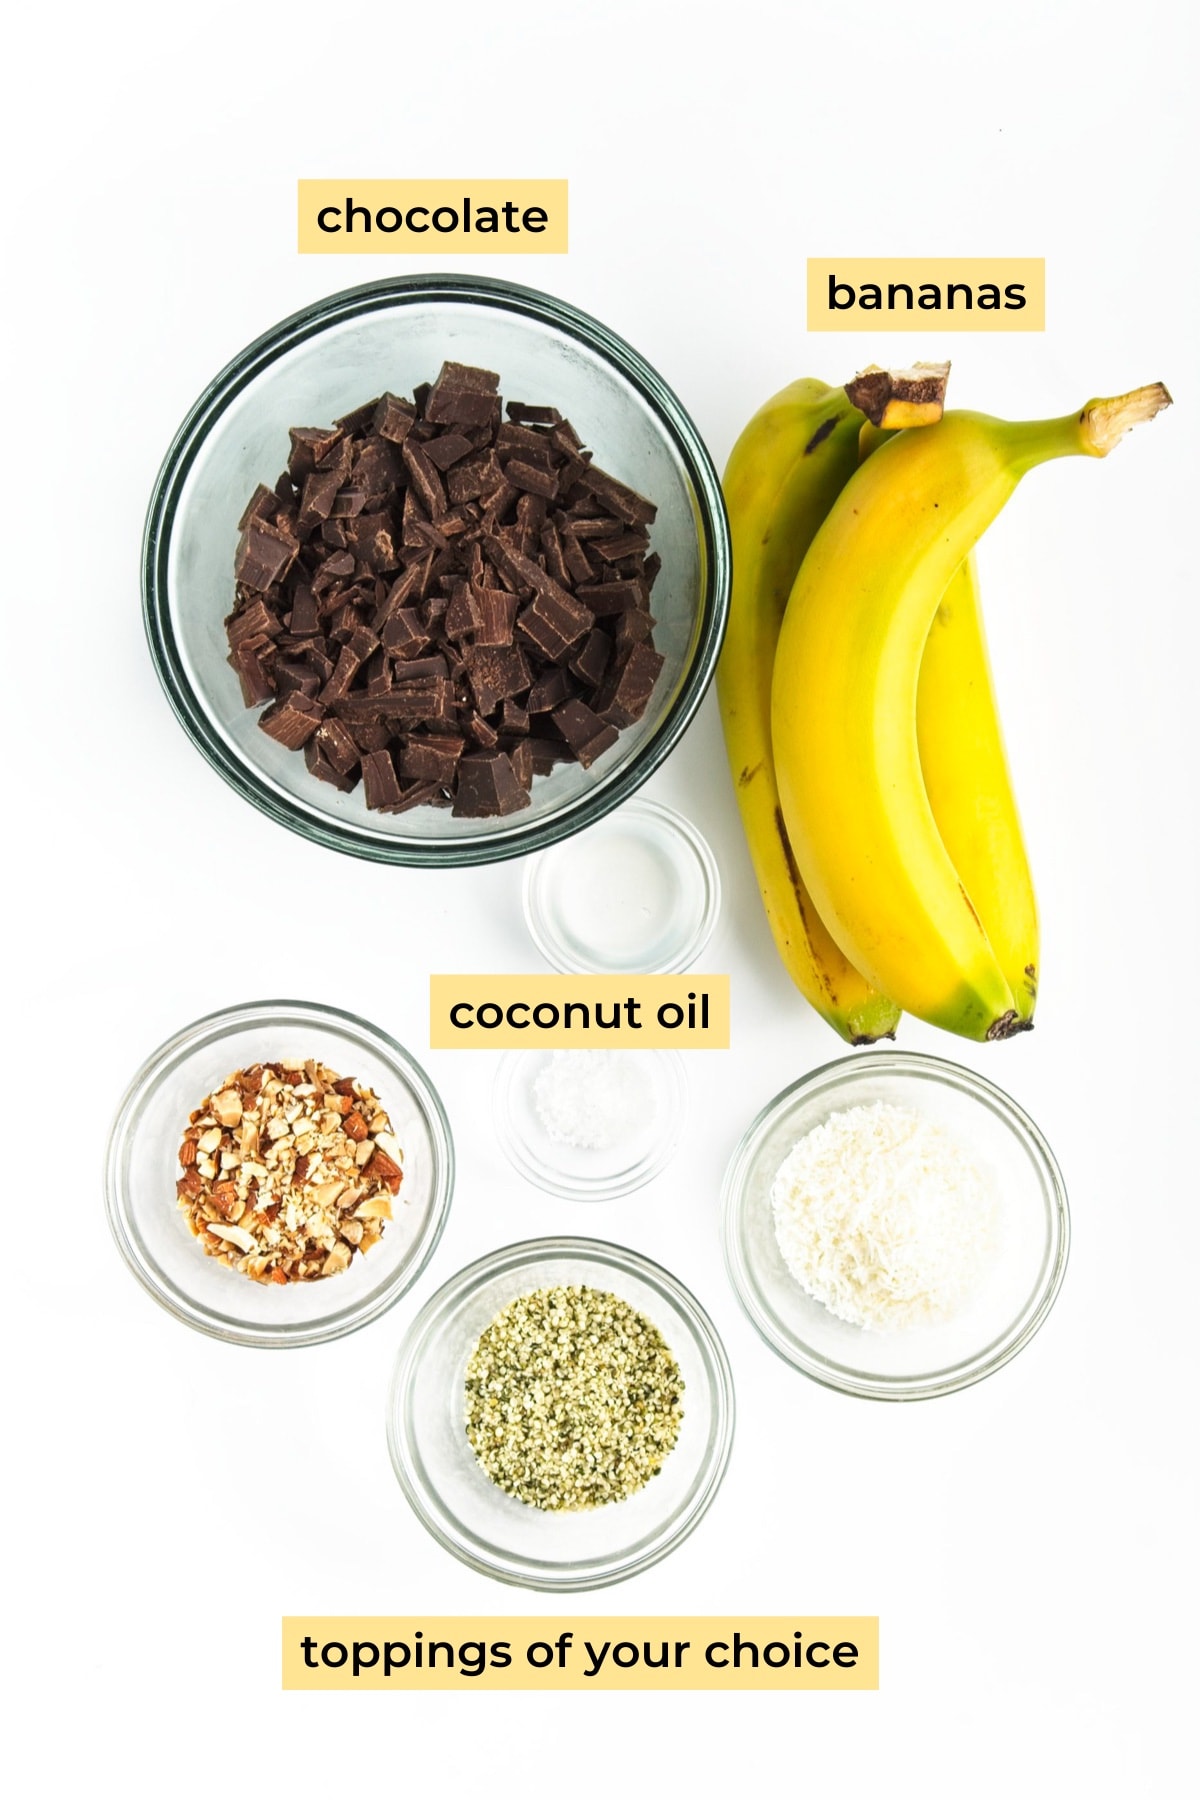 Ingredients: chocolate, bananas, coconut oil, toppings of your choice.